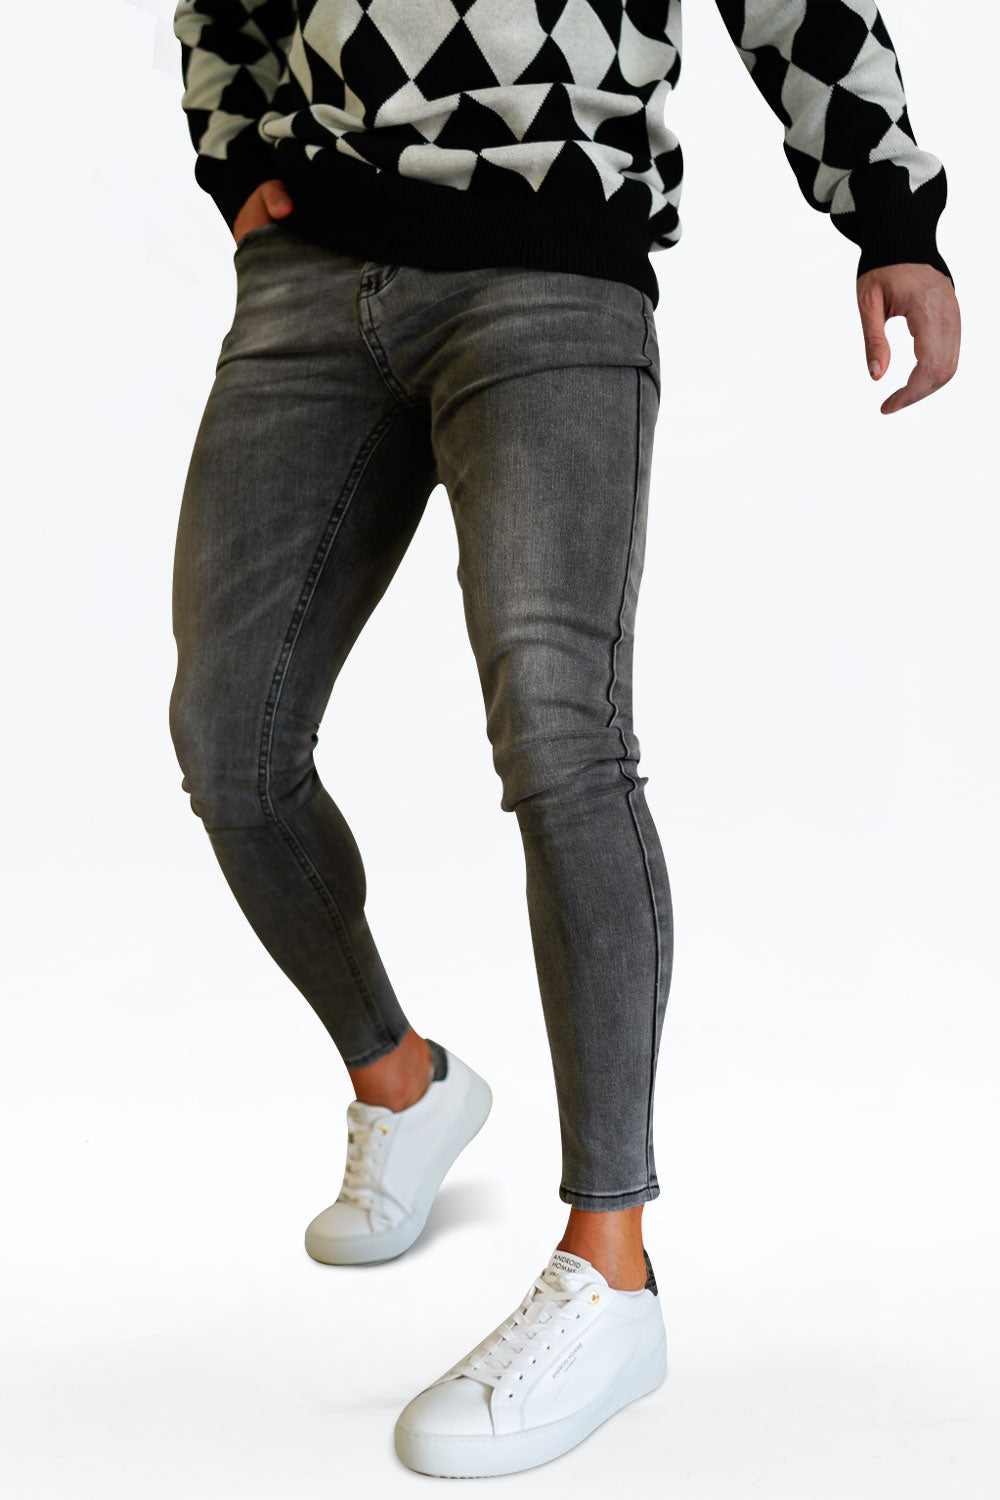 Gingtto Stretch Grey Jeans: Sleek And Stylish For The Modern Man